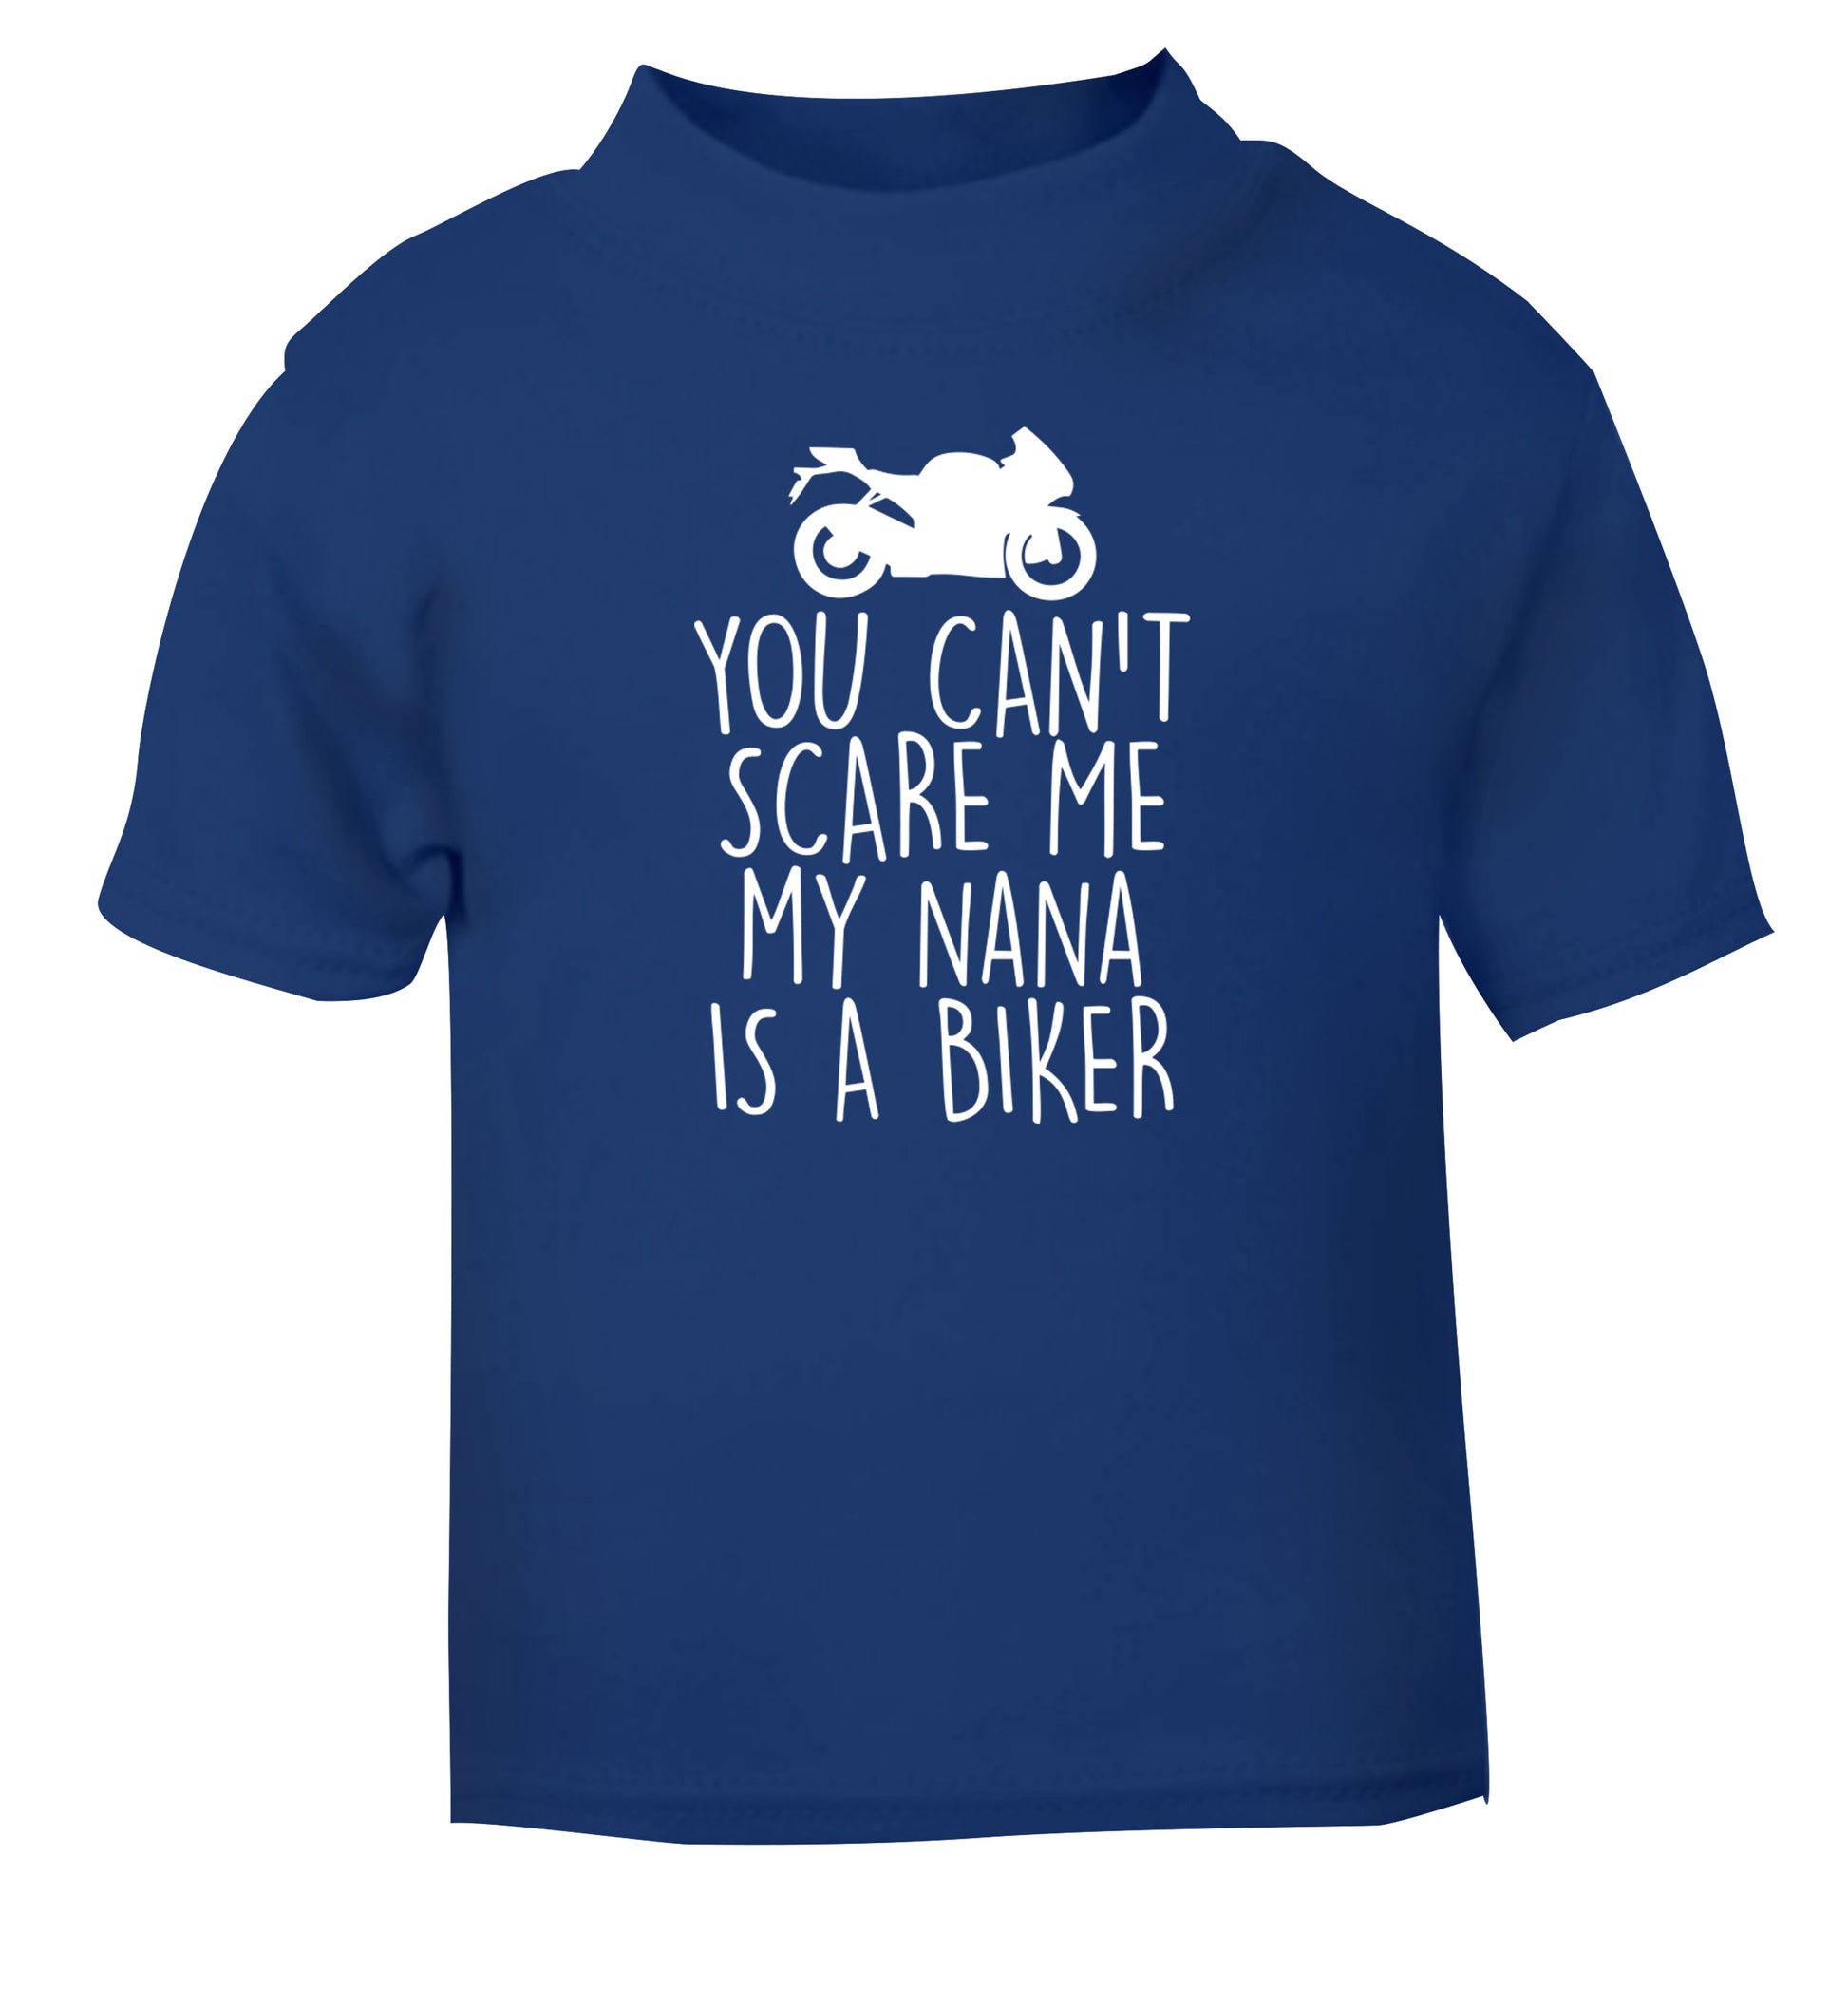 You can't scare me my nana is a biker blue Baby Toddler Tshirt 2 Years